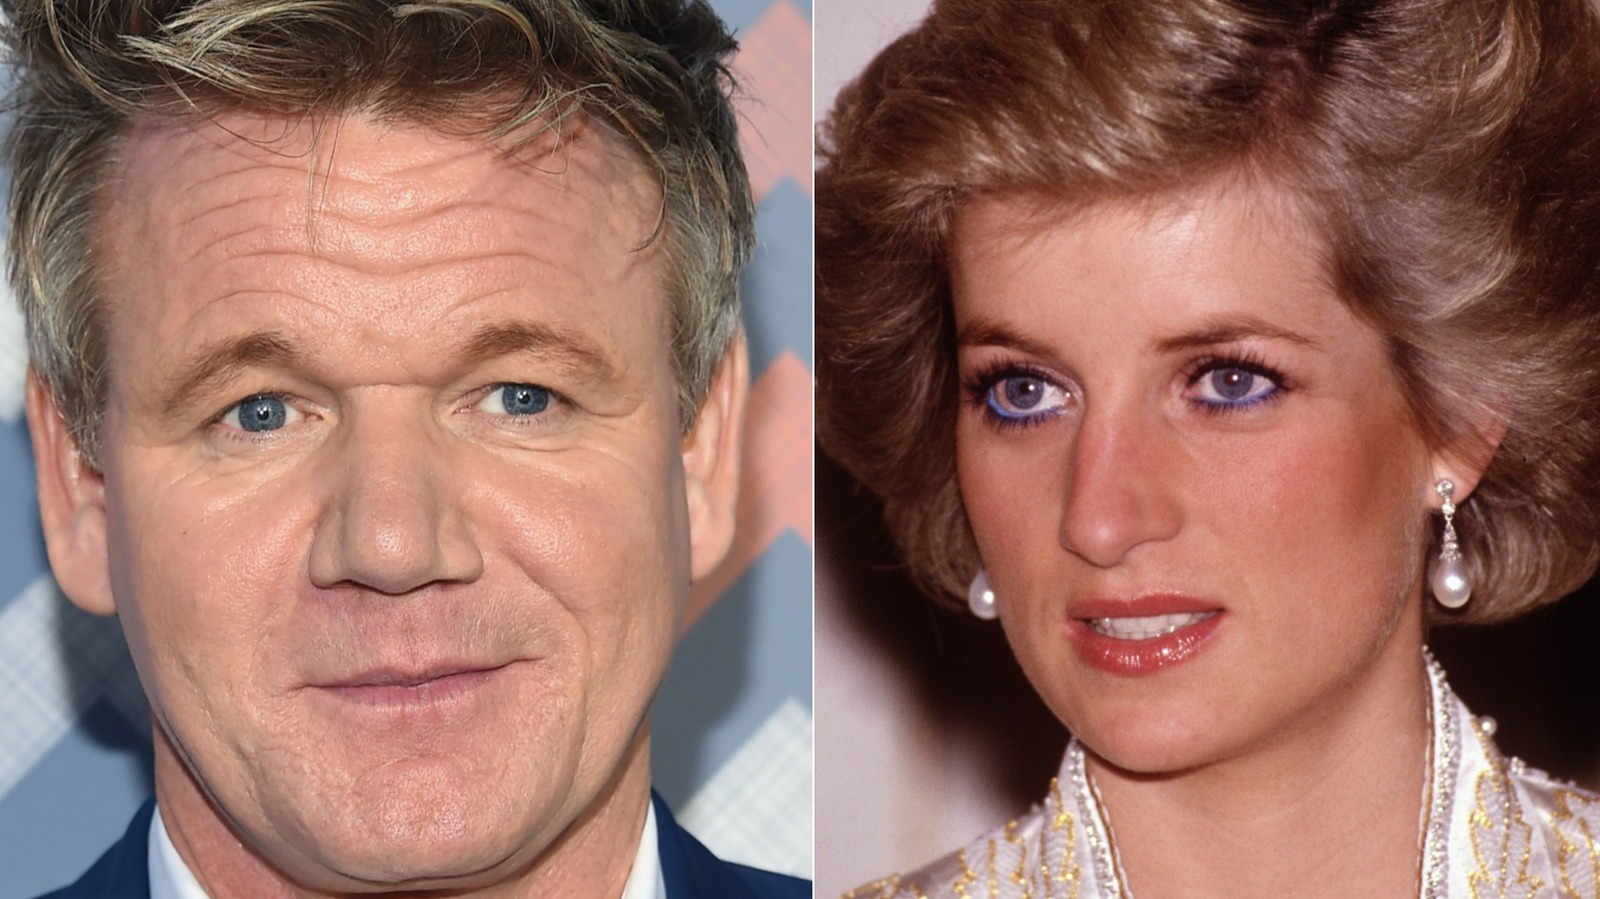 The Meal Gordon Ramsay Once Cooked For Princess Diana